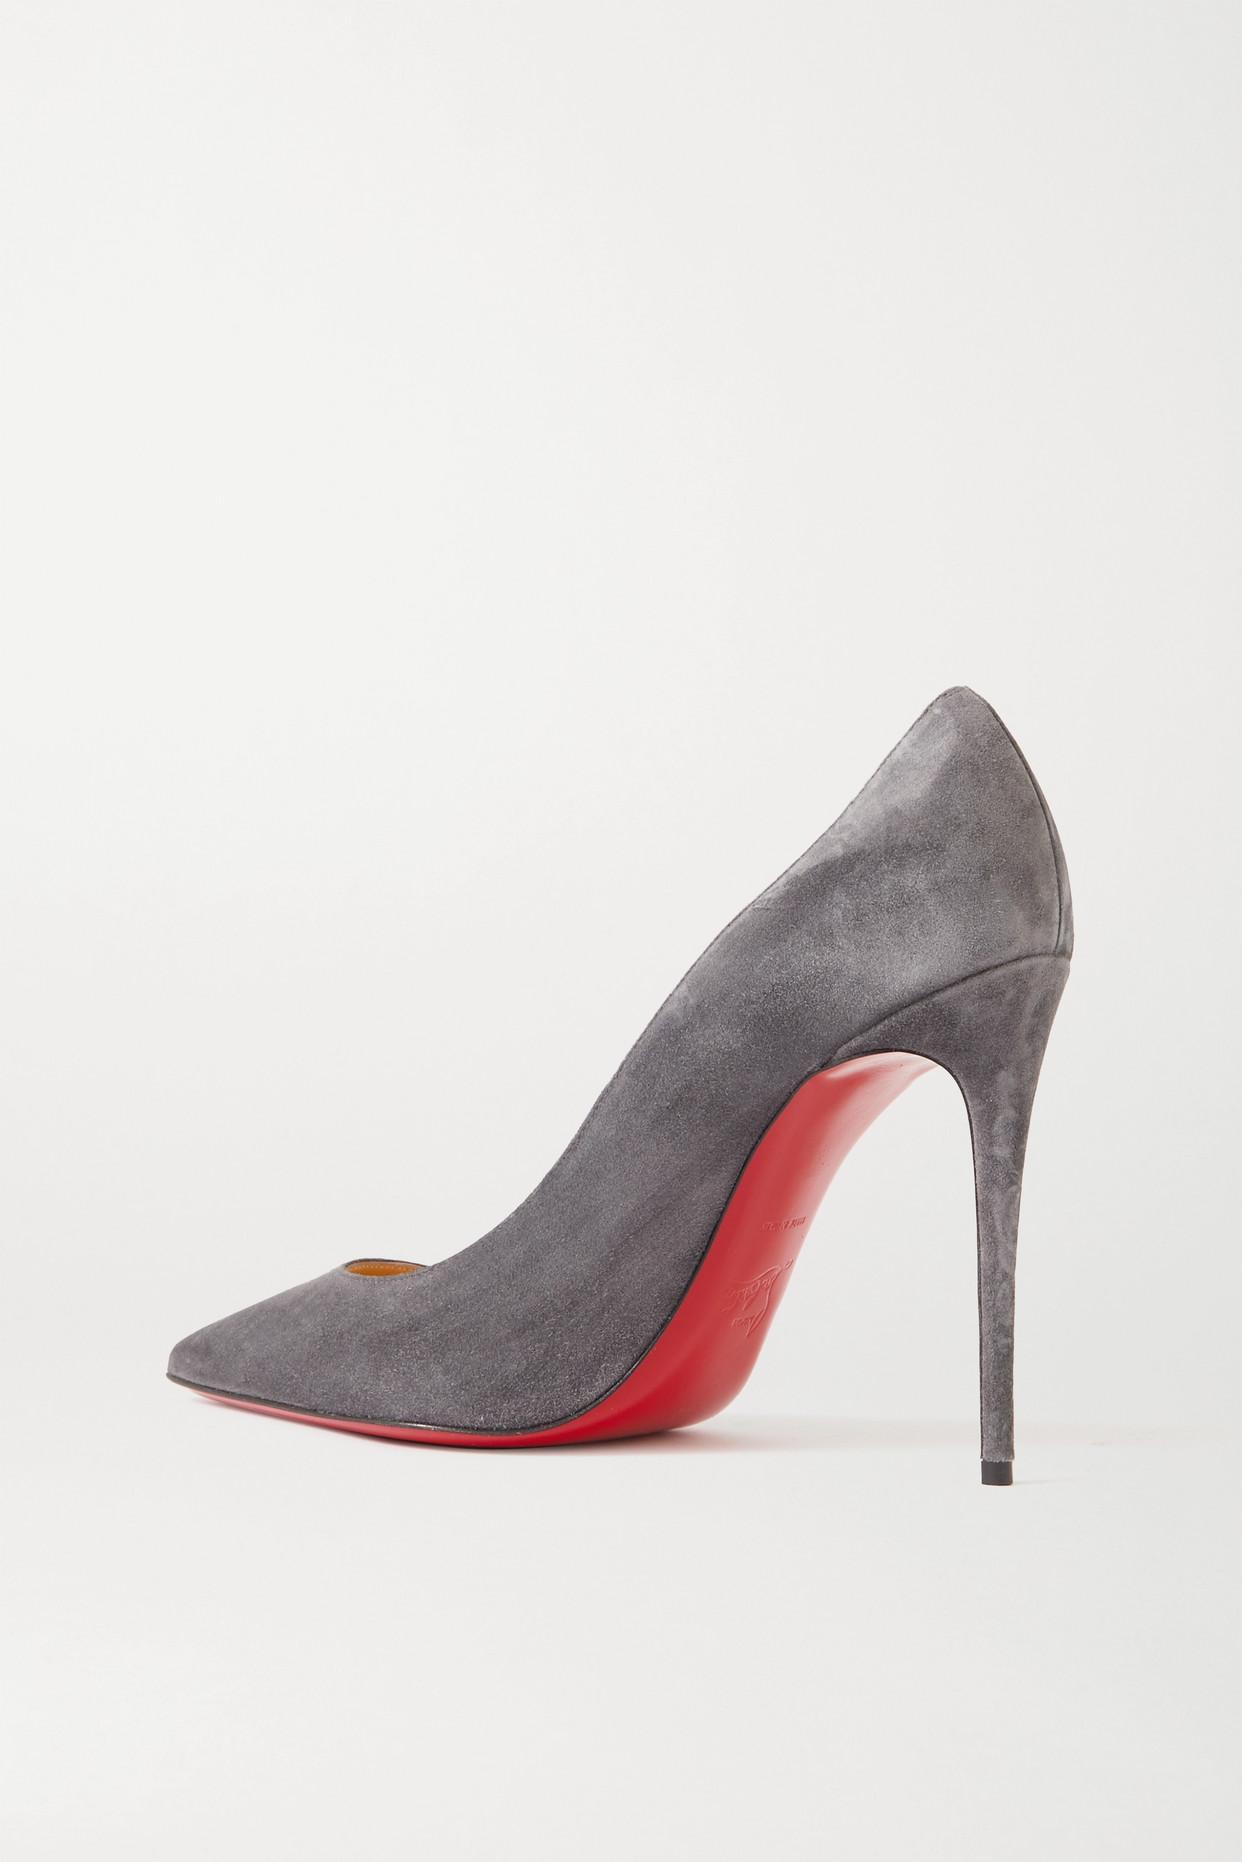 Christian Kate 100 Suede Pumps in -